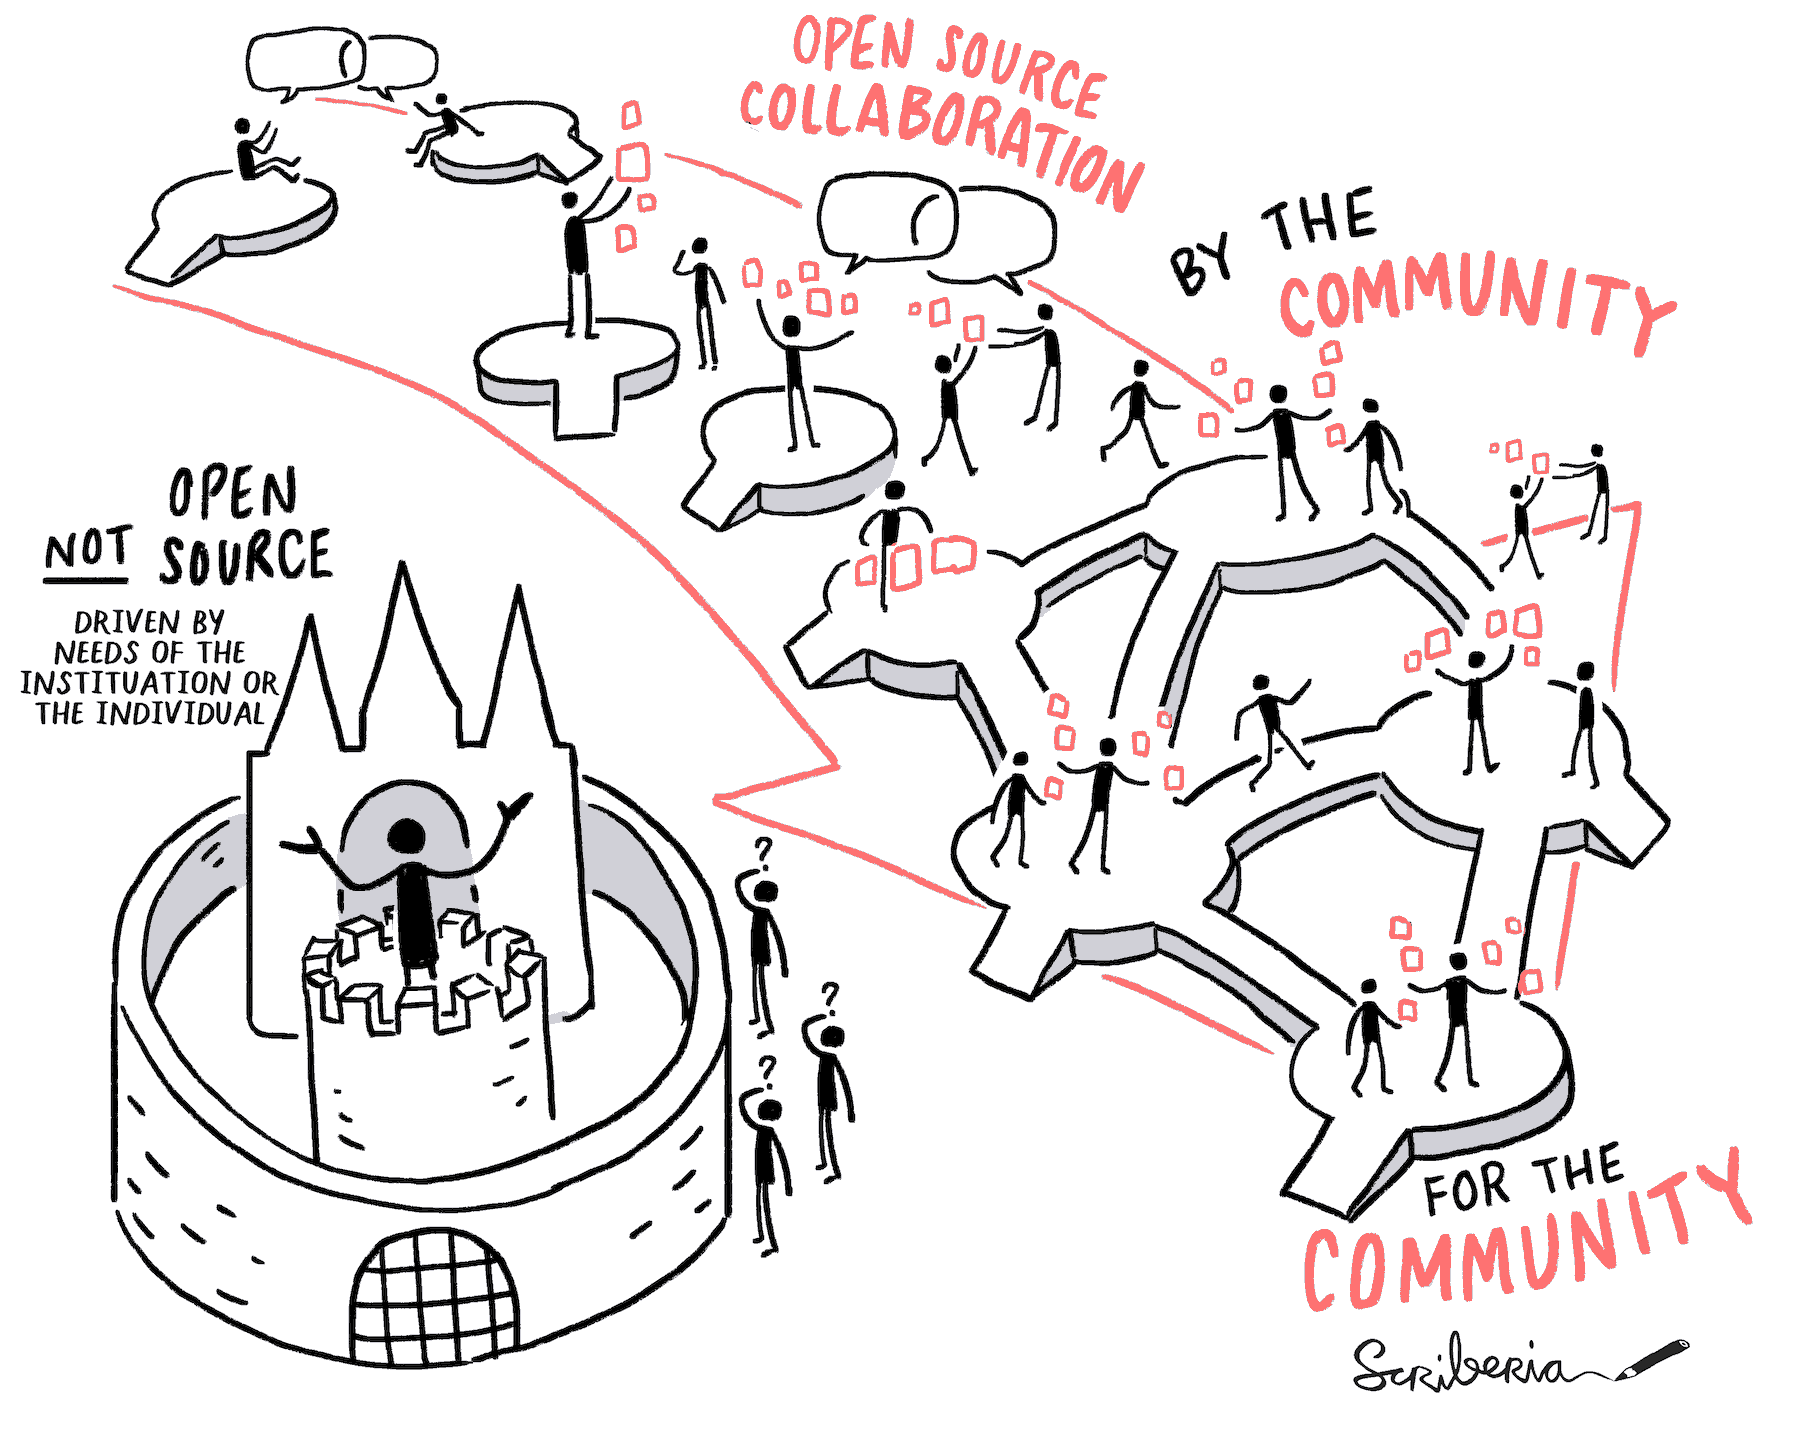 This illustration shows that closed source projects are driven by the needs of the institution or the individuals whereas the open source community allows different people to interact, exchange ideas, collaborate and build resources using “by the community - for the community” principles